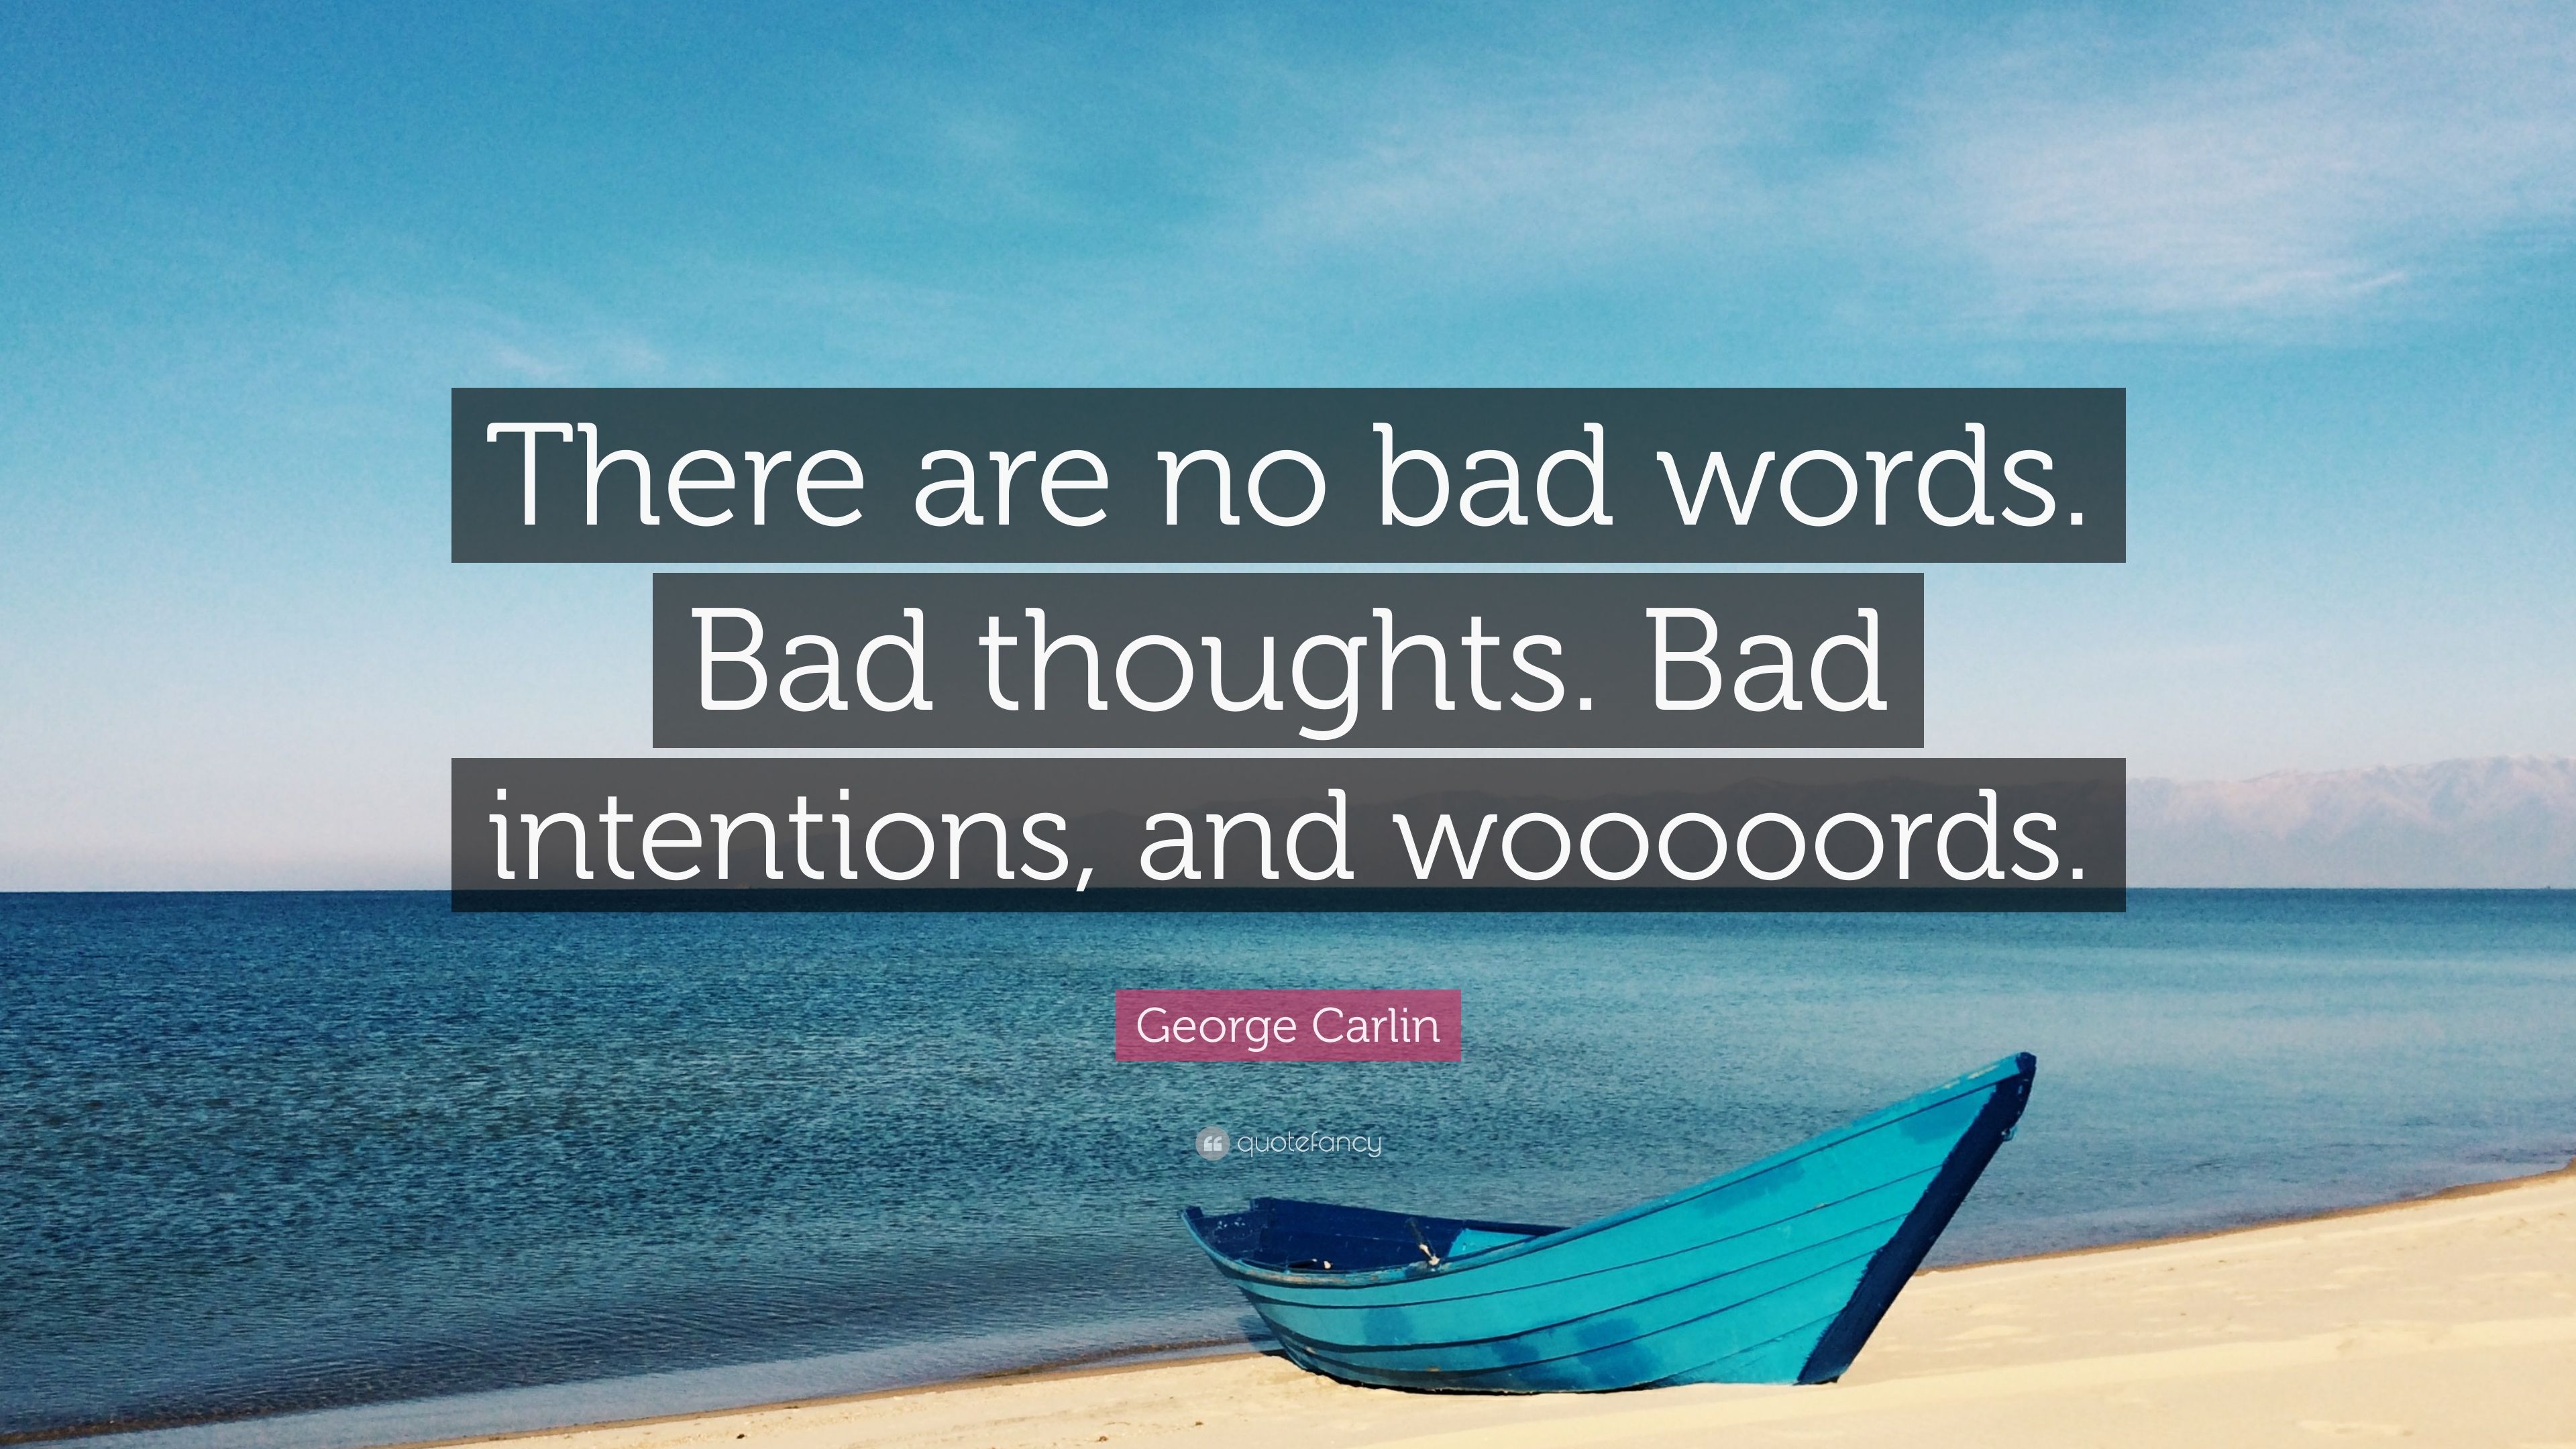 George Carlin Quote: “There are no bad words. Bad thoughts. Bad